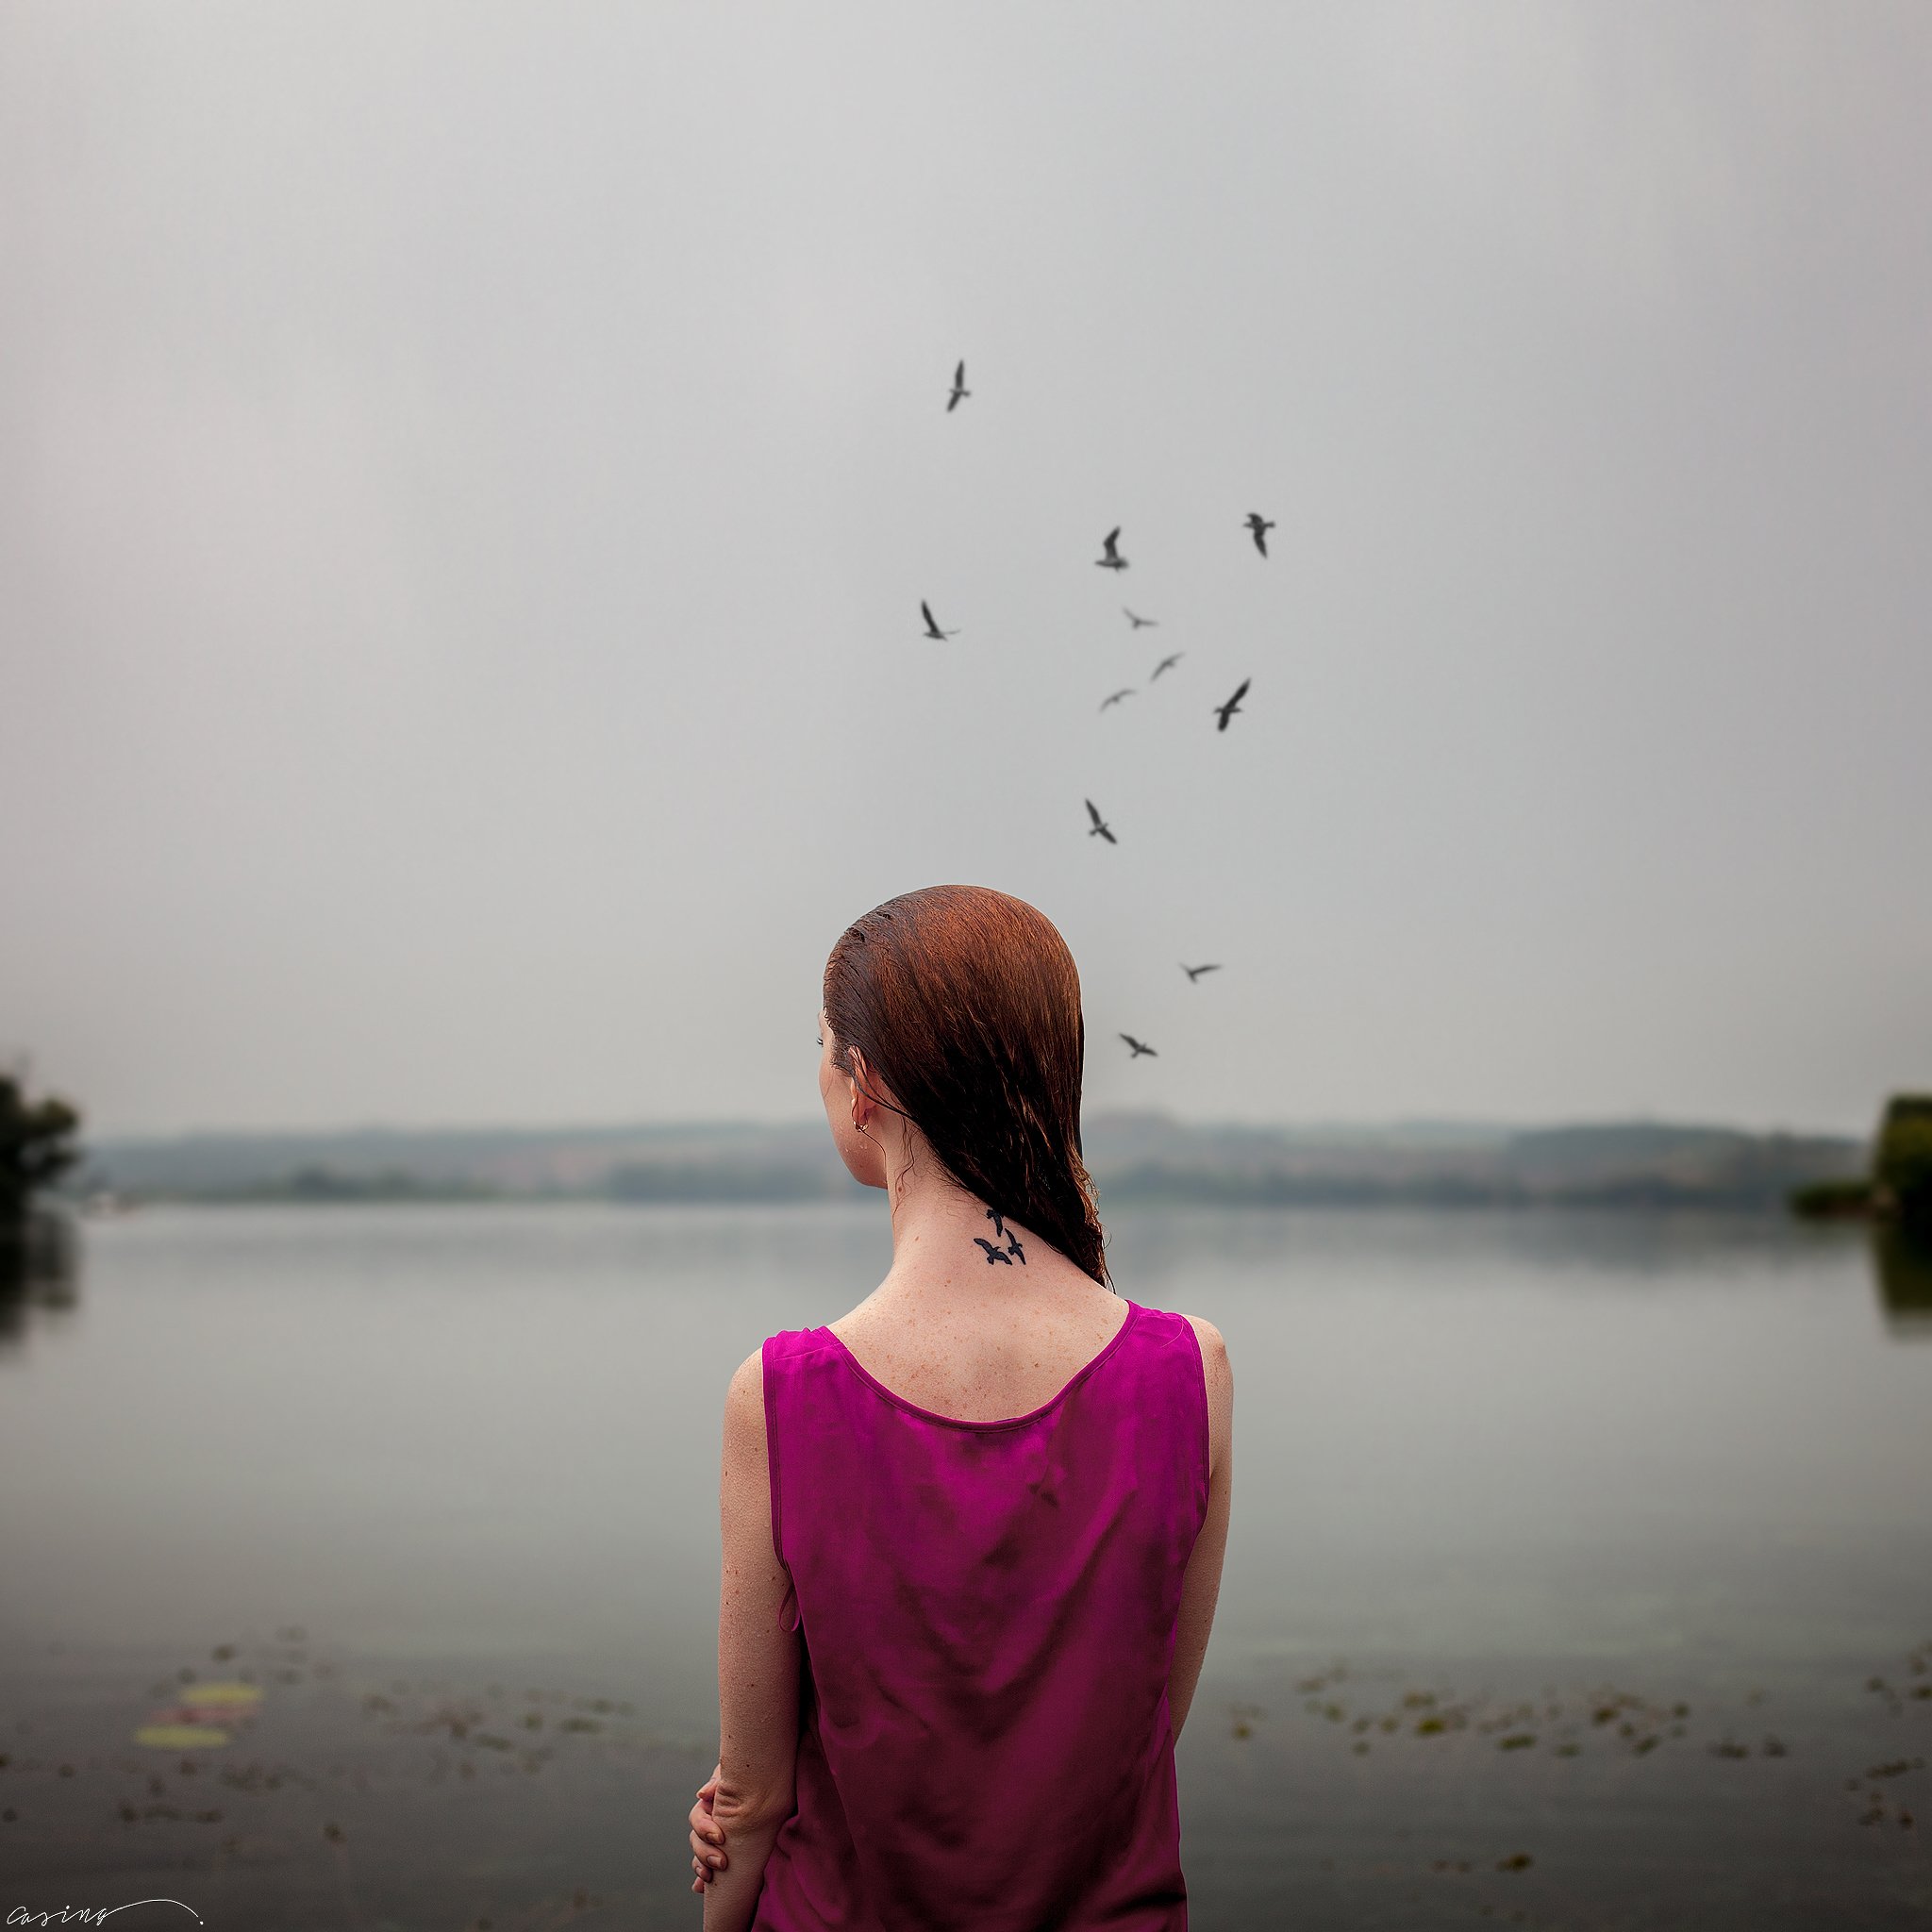 lonely, loneliness, girl, portrait, river, birds, water, Casing